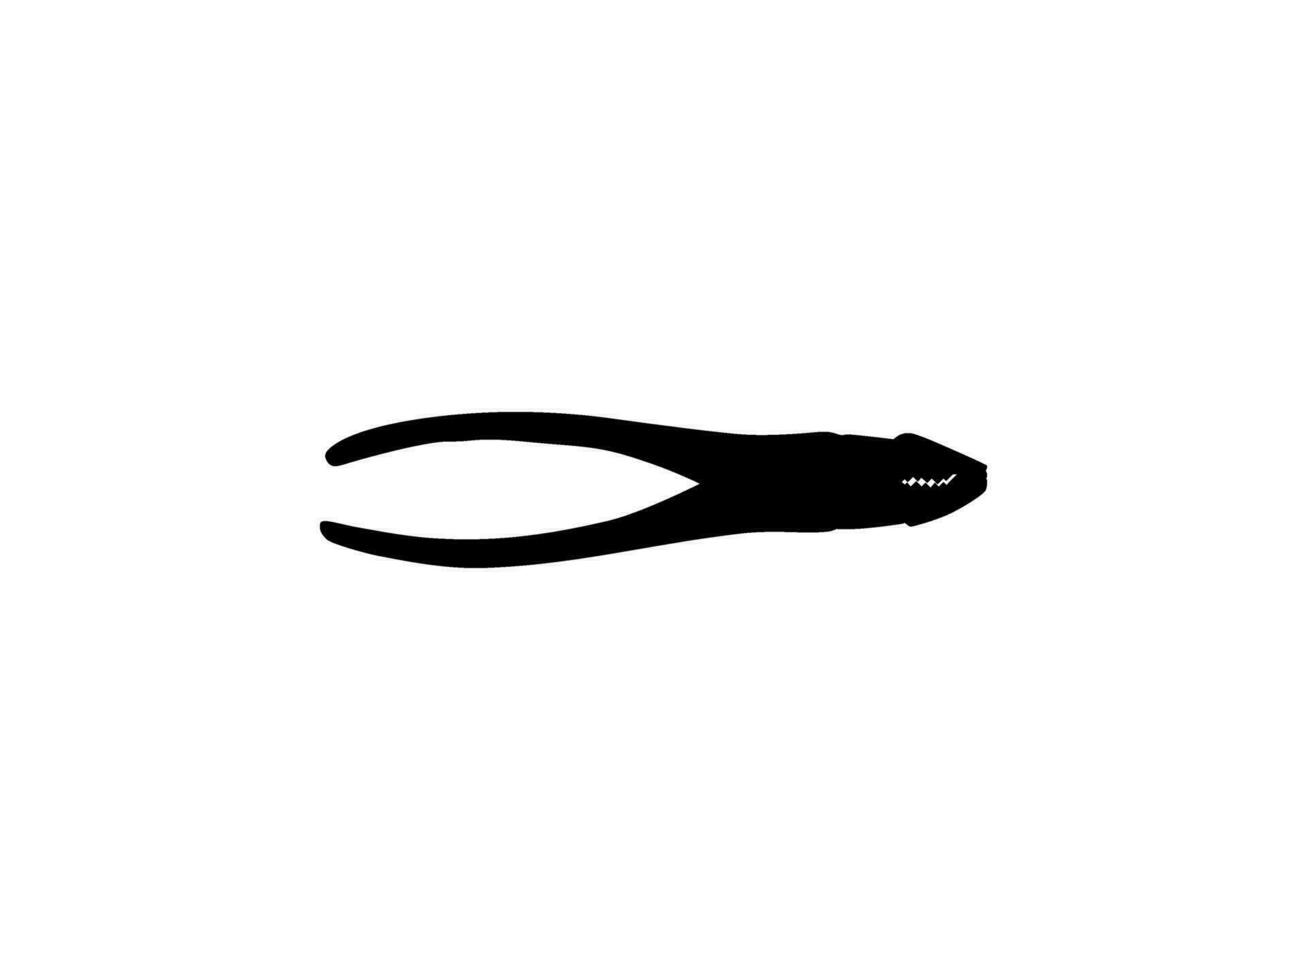 Pliers Silhouette, Flat Style, can use for Pictogram, Logo Gram, Art Illustration, Apps, Website, Icon, Symbol or Graphic Design Element. Vector Illustration